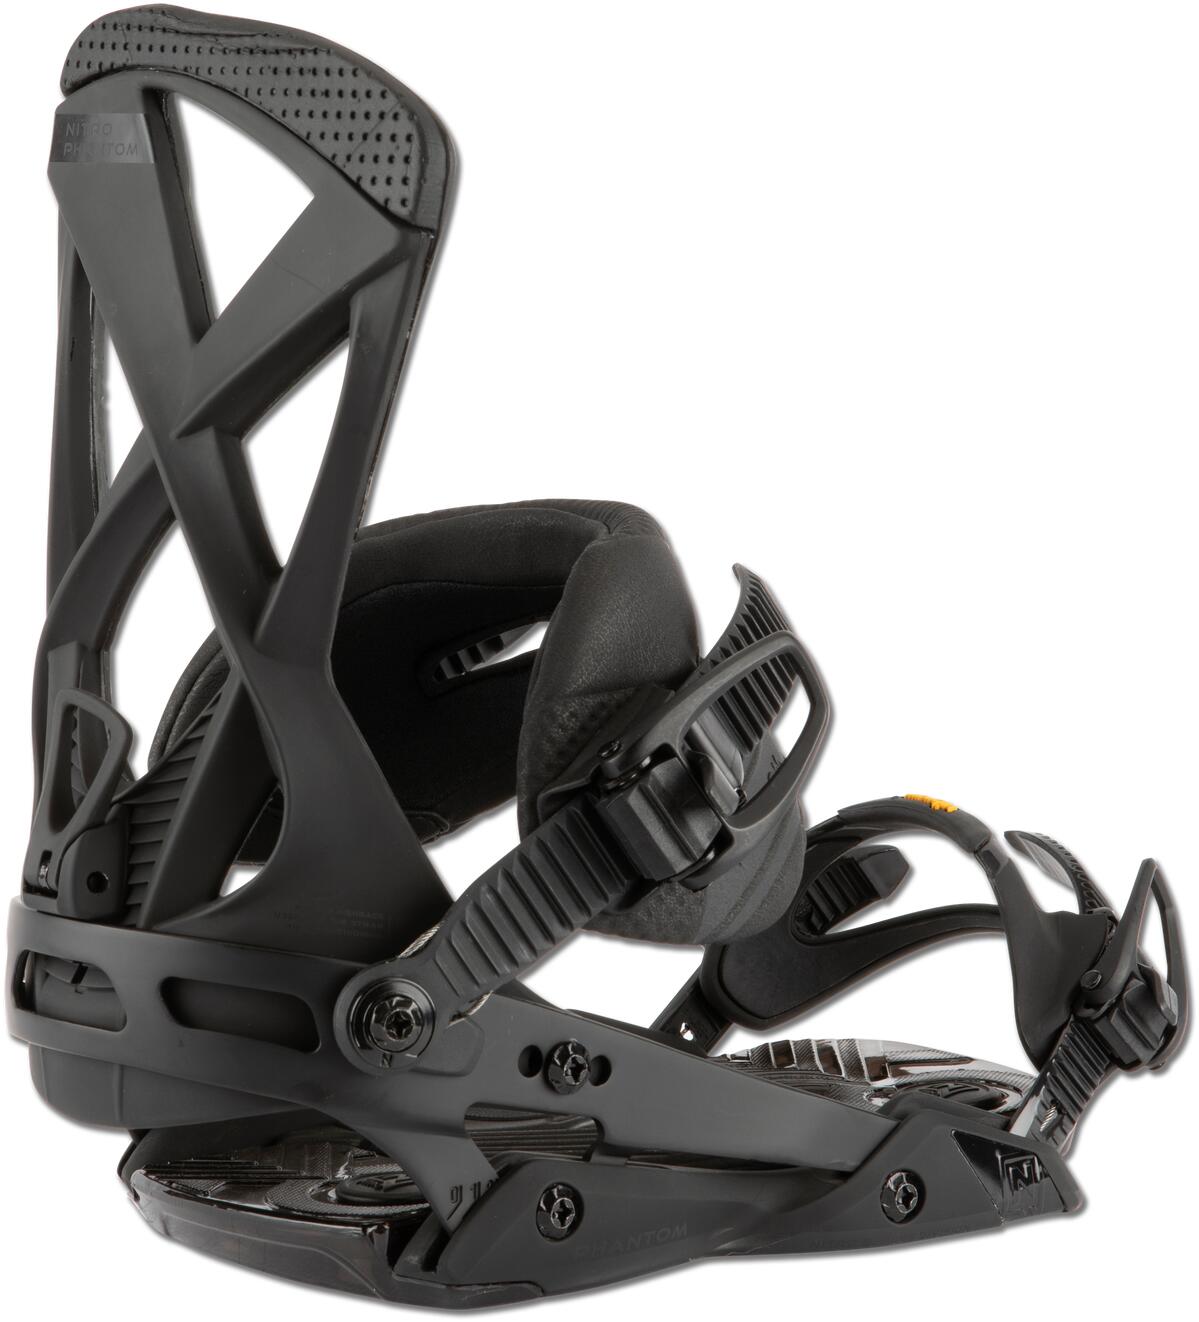 Black x 2 Toe Cable Ladder Straps With Plug Nitro Snowboard Bindings 